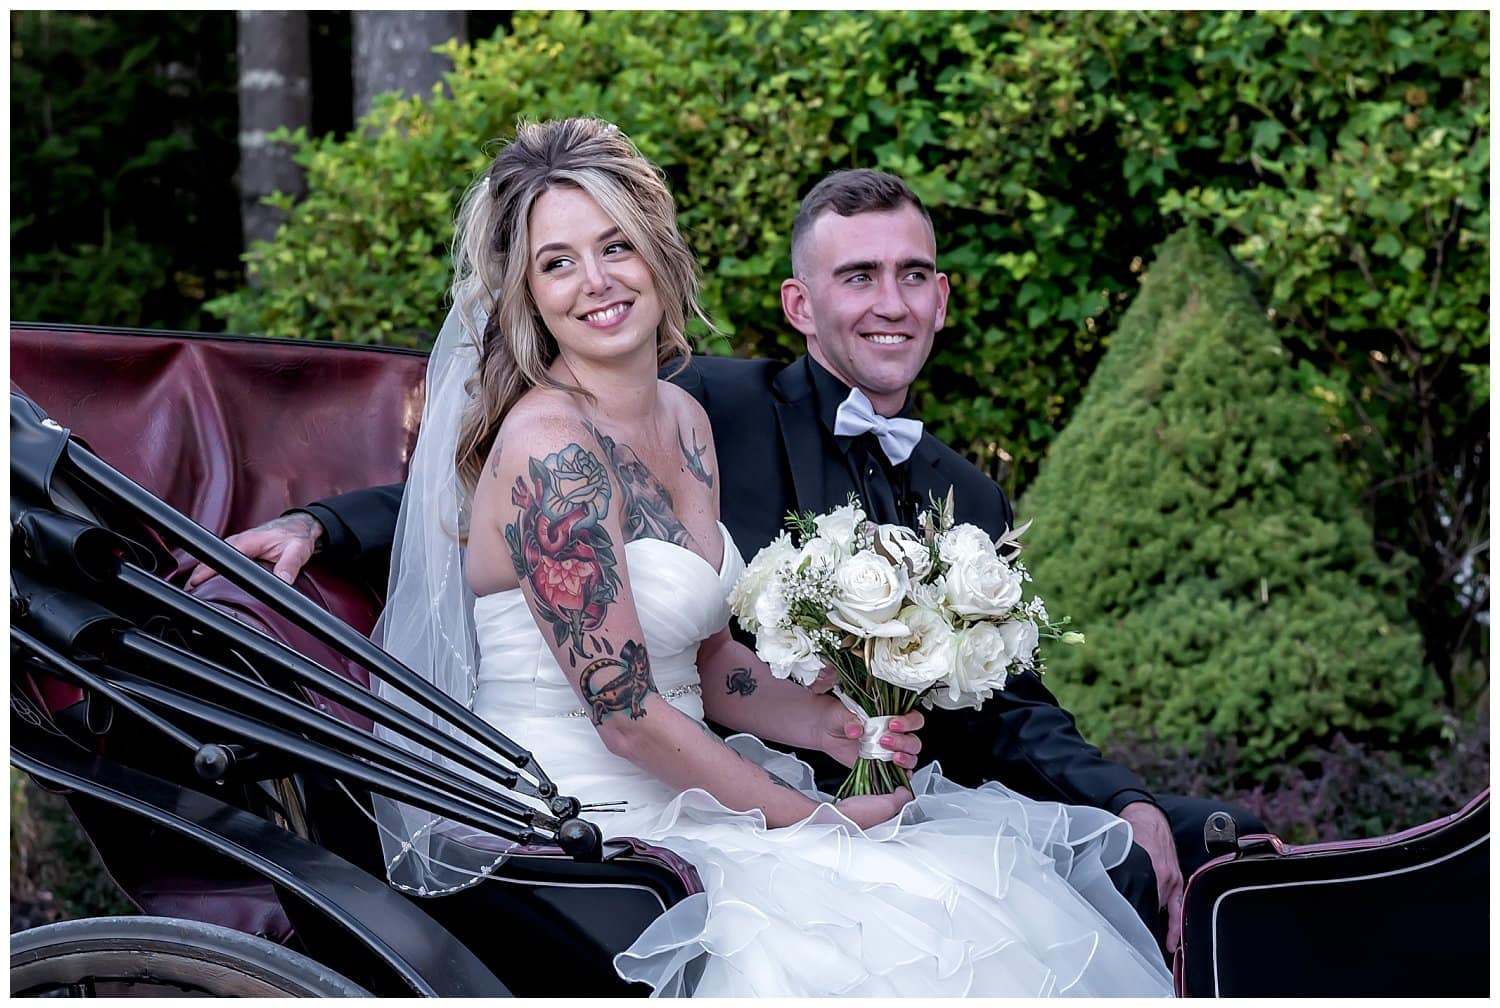 The bride and groom in the horse and carriage after their wedding ceremony at Hatfield Farm.